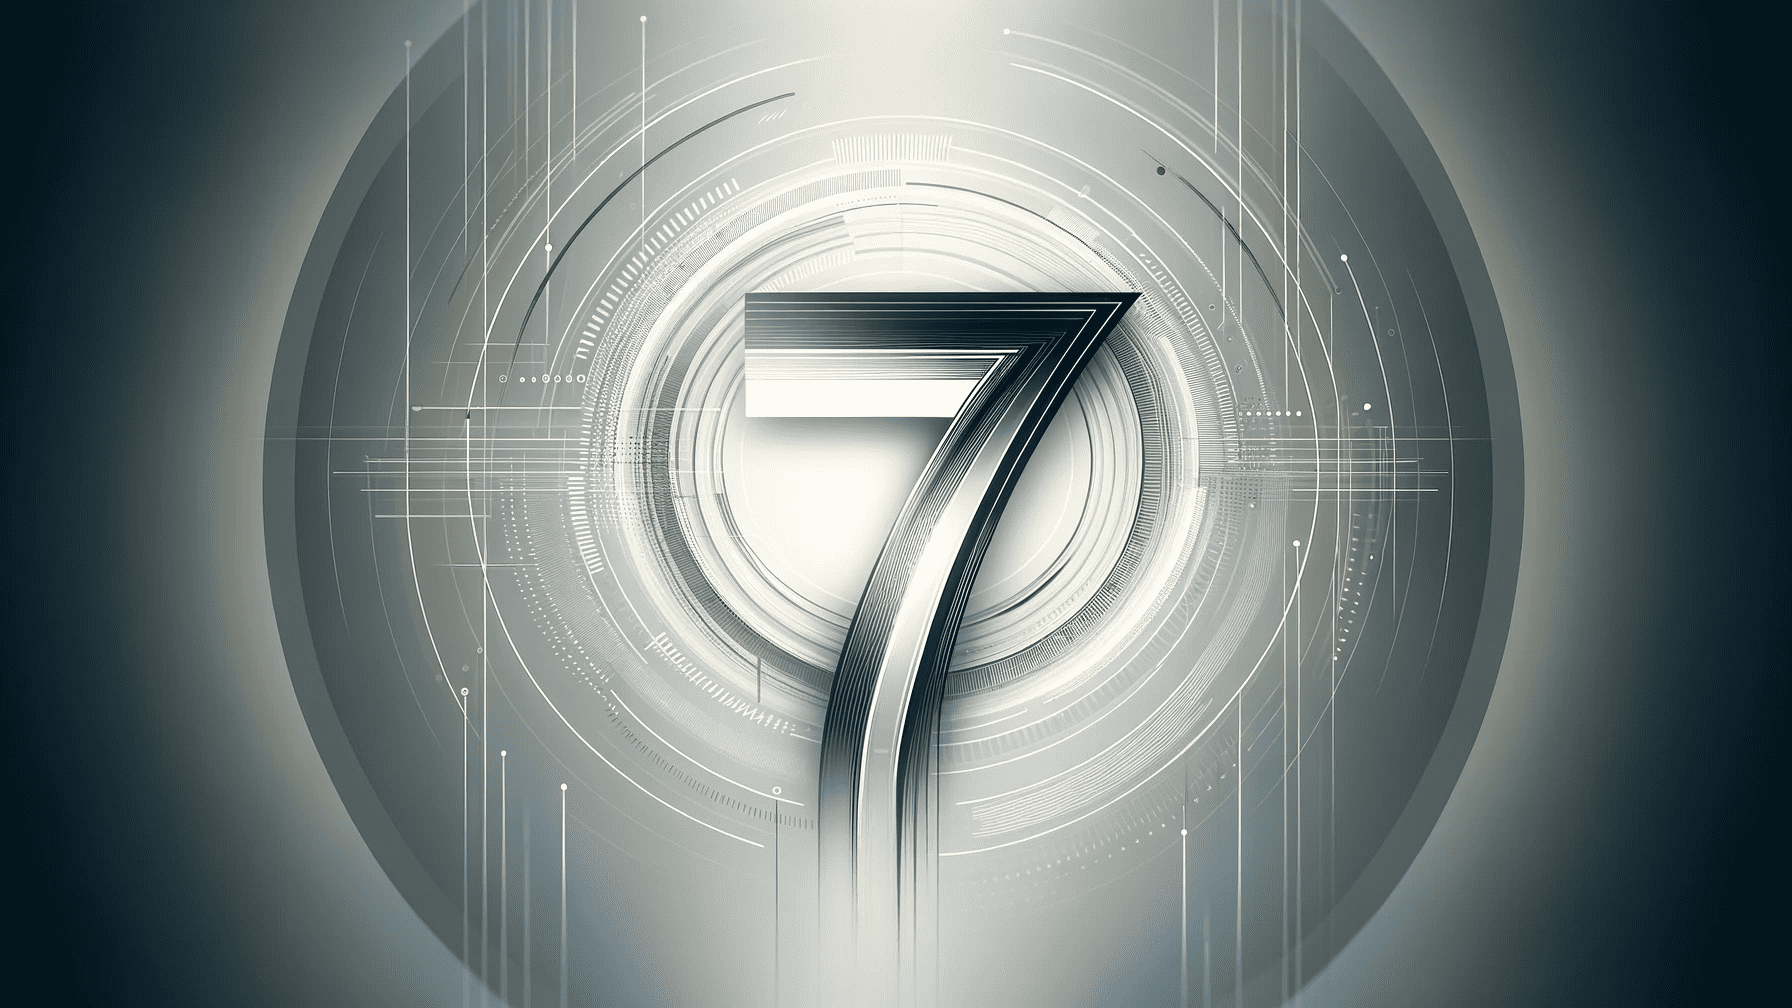 Stylistic image of a 7 representing Wi-Fi 7 